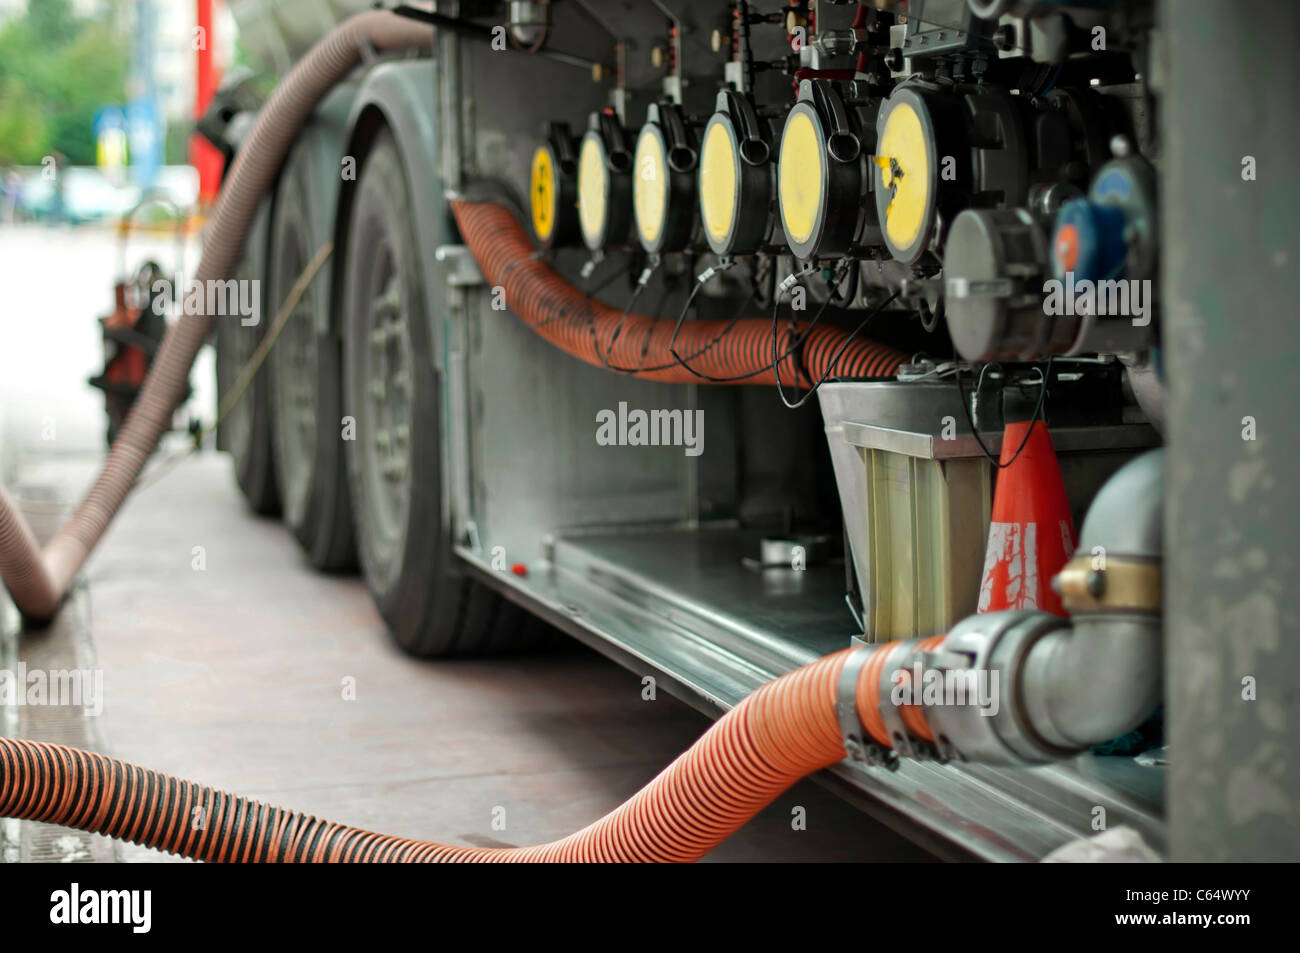 Fuel truck which refill. Hoses and pumps to load the truck Stock Photo